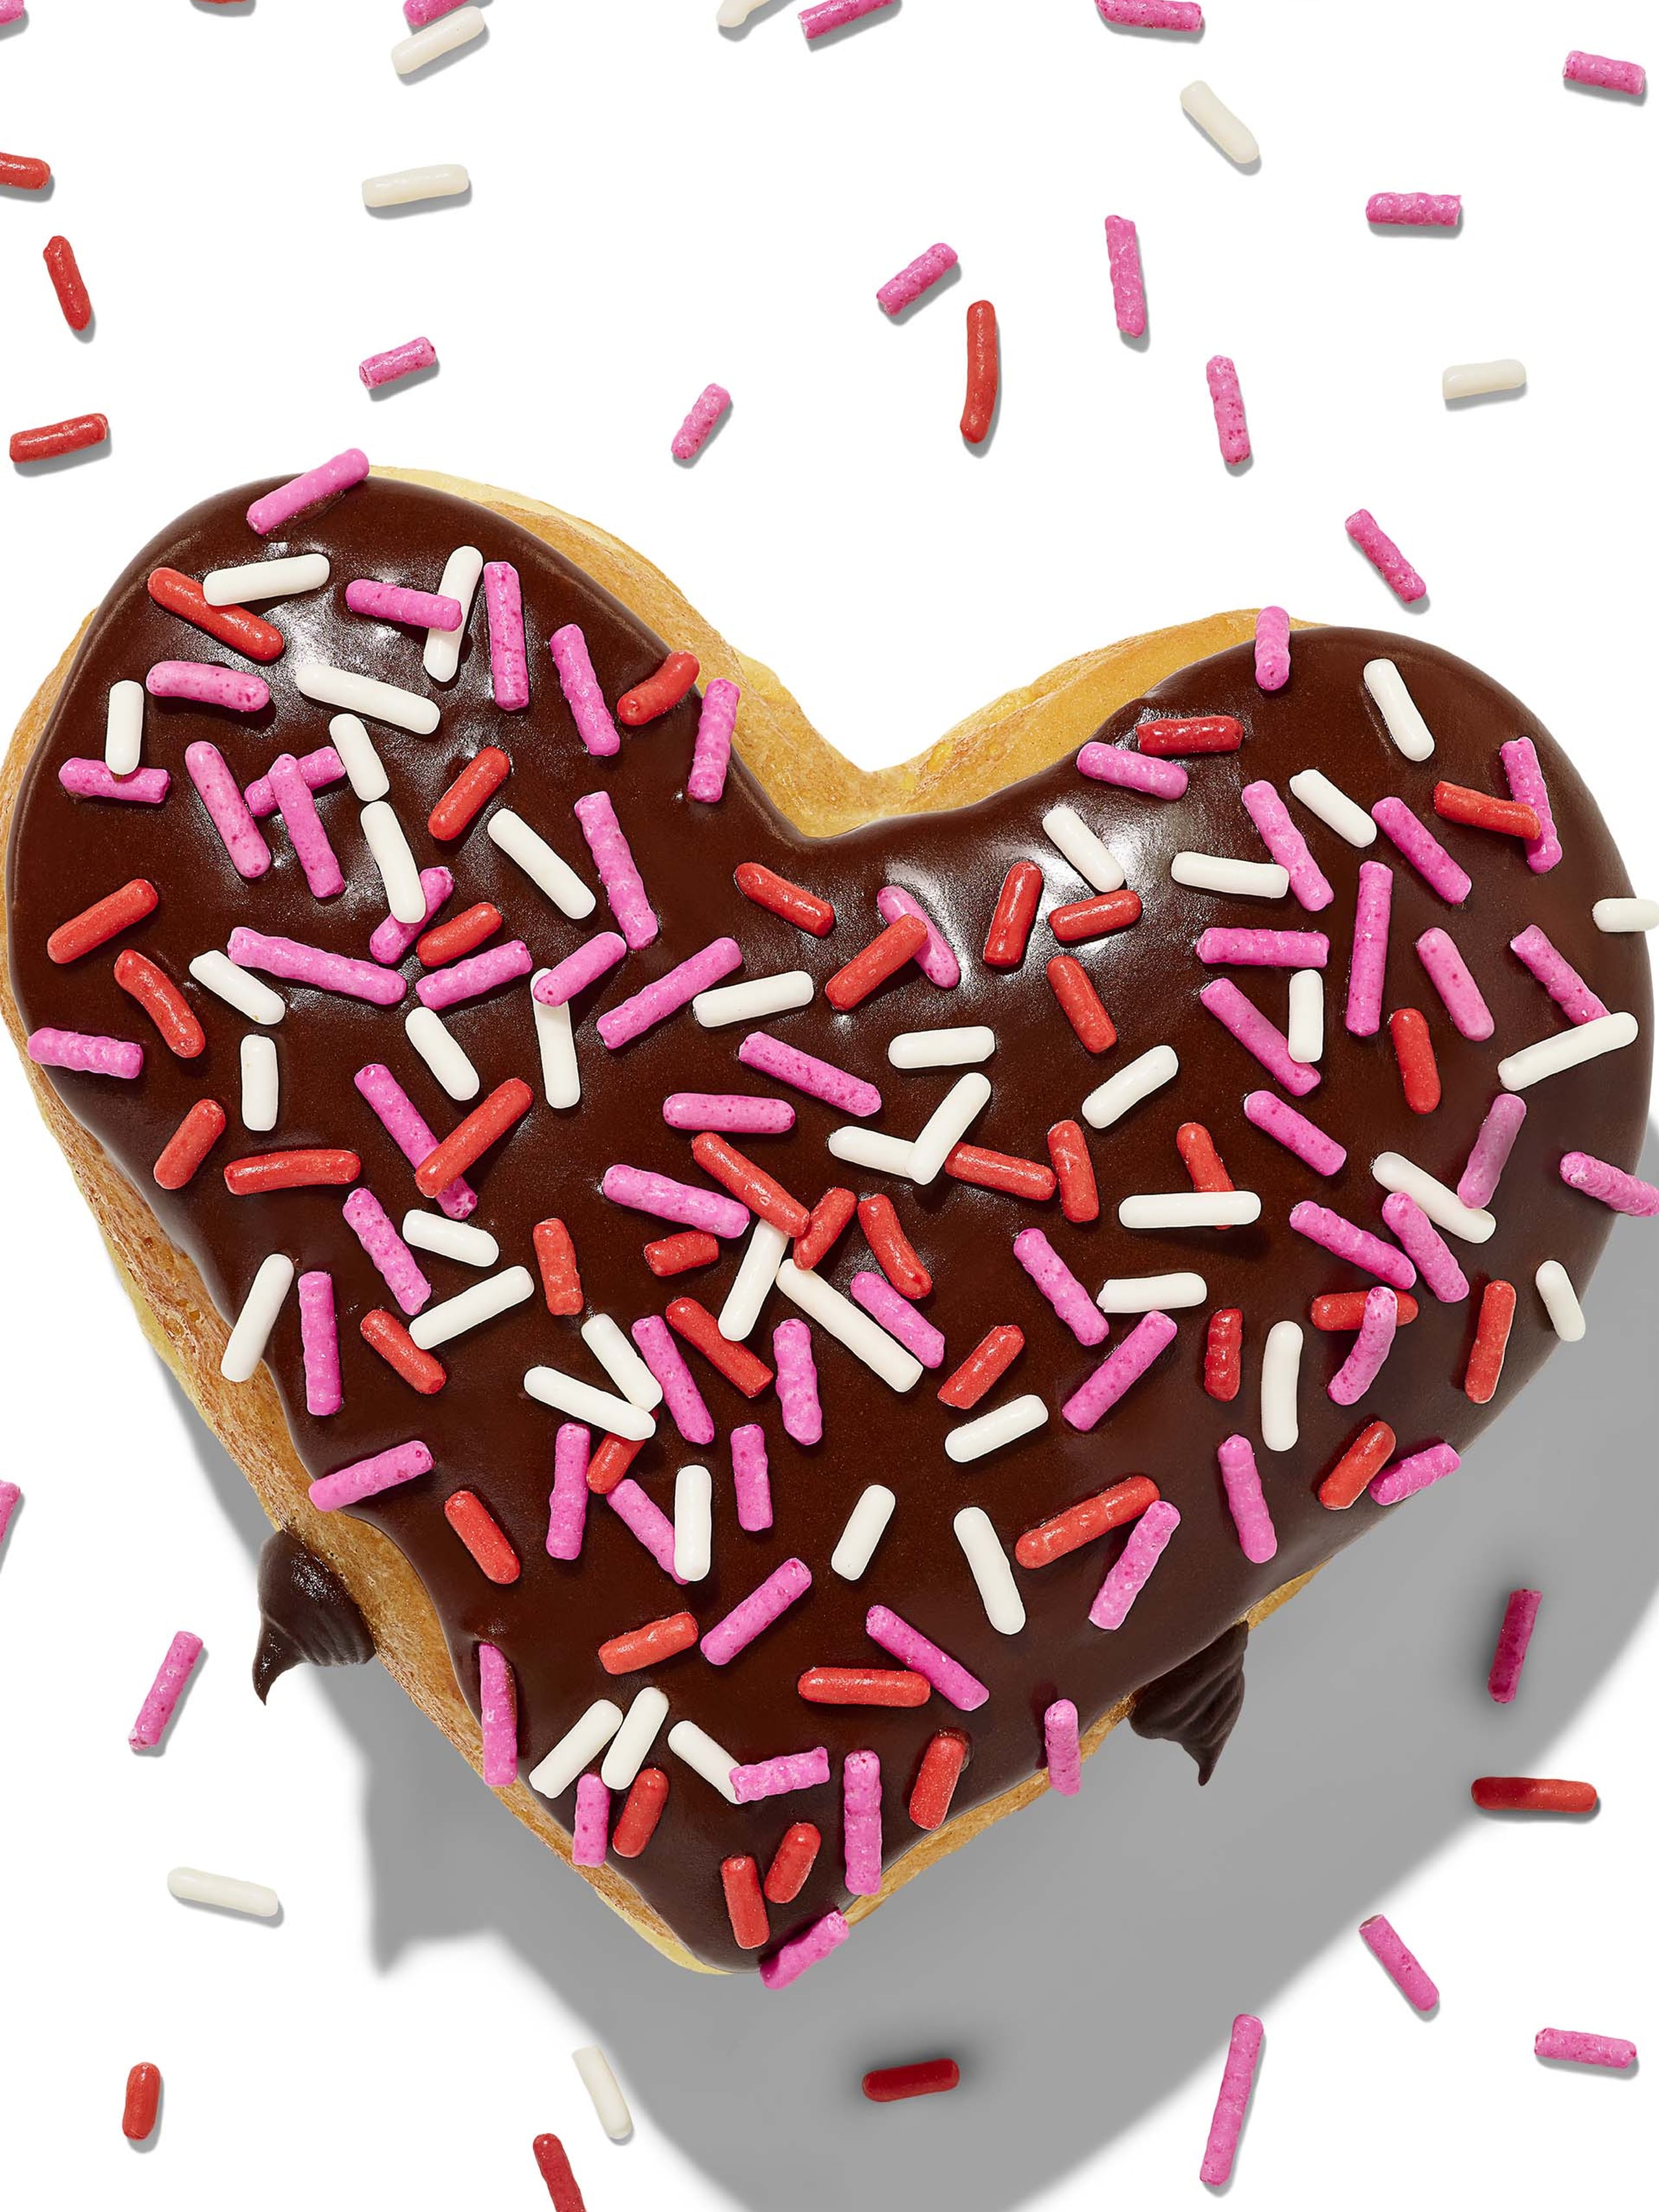 Tim Hortons' Valentine's Day Menu Includes Heart-Shaped Donuts